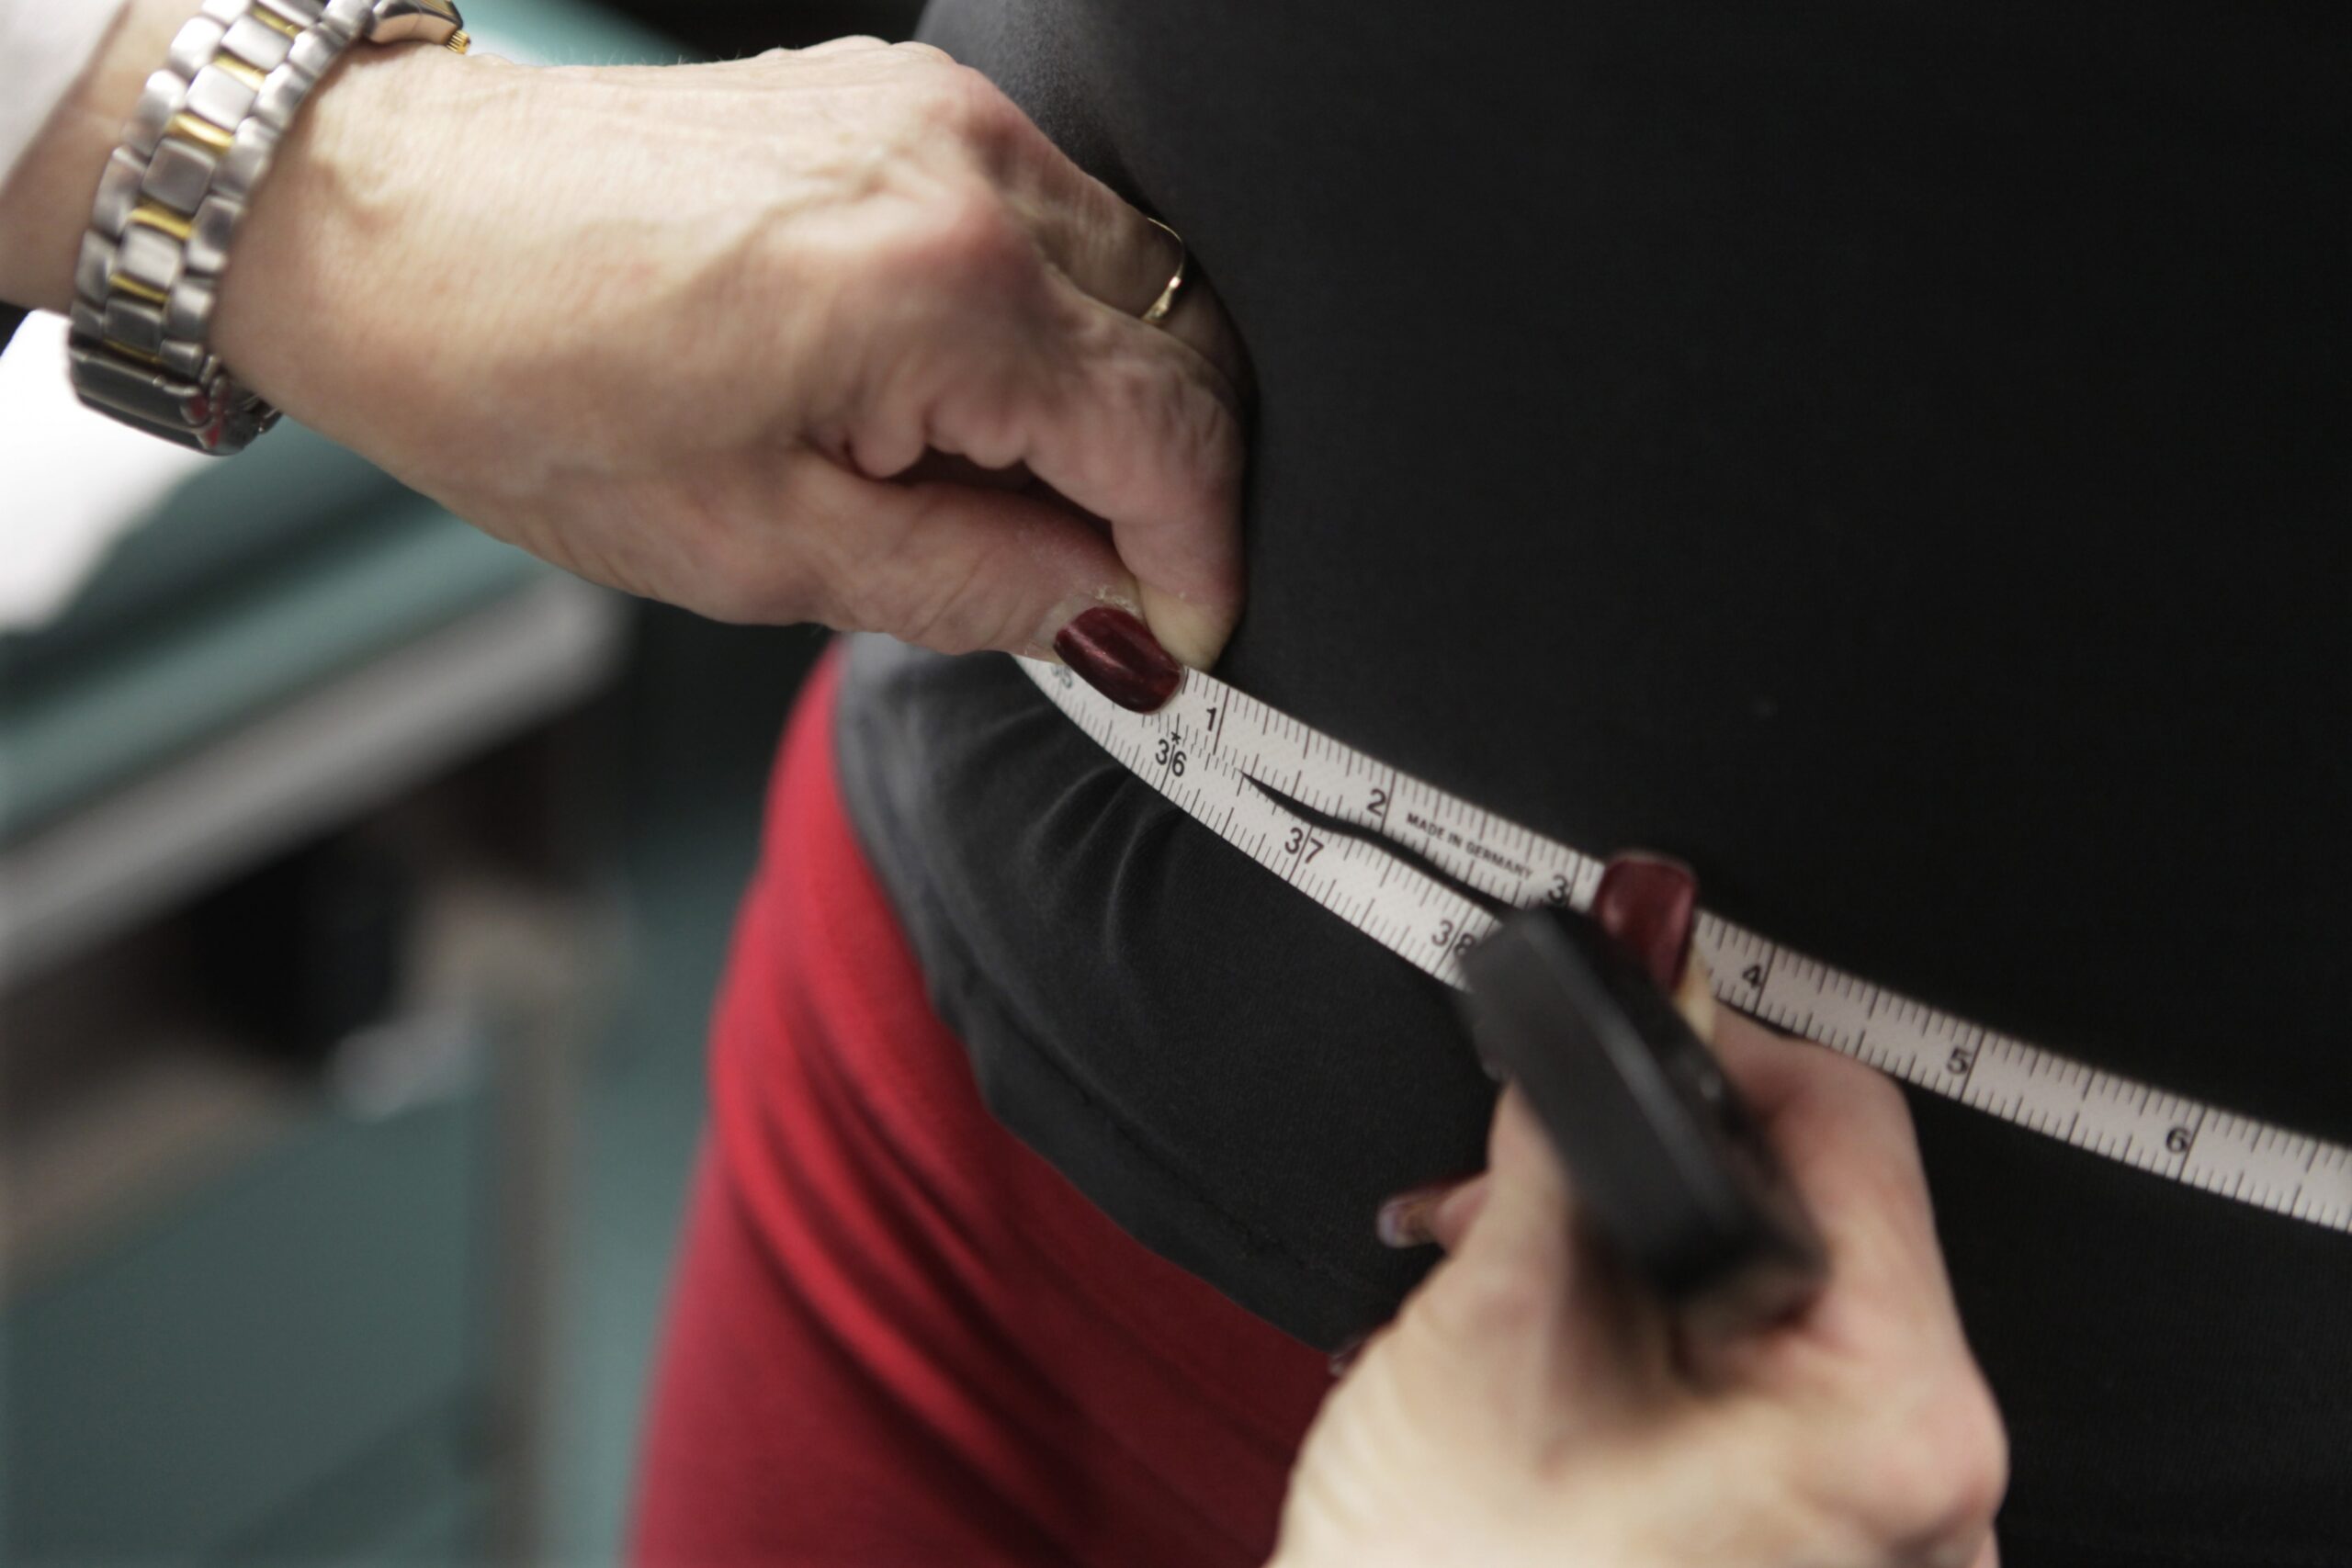 a waist is measured to prevent obesity